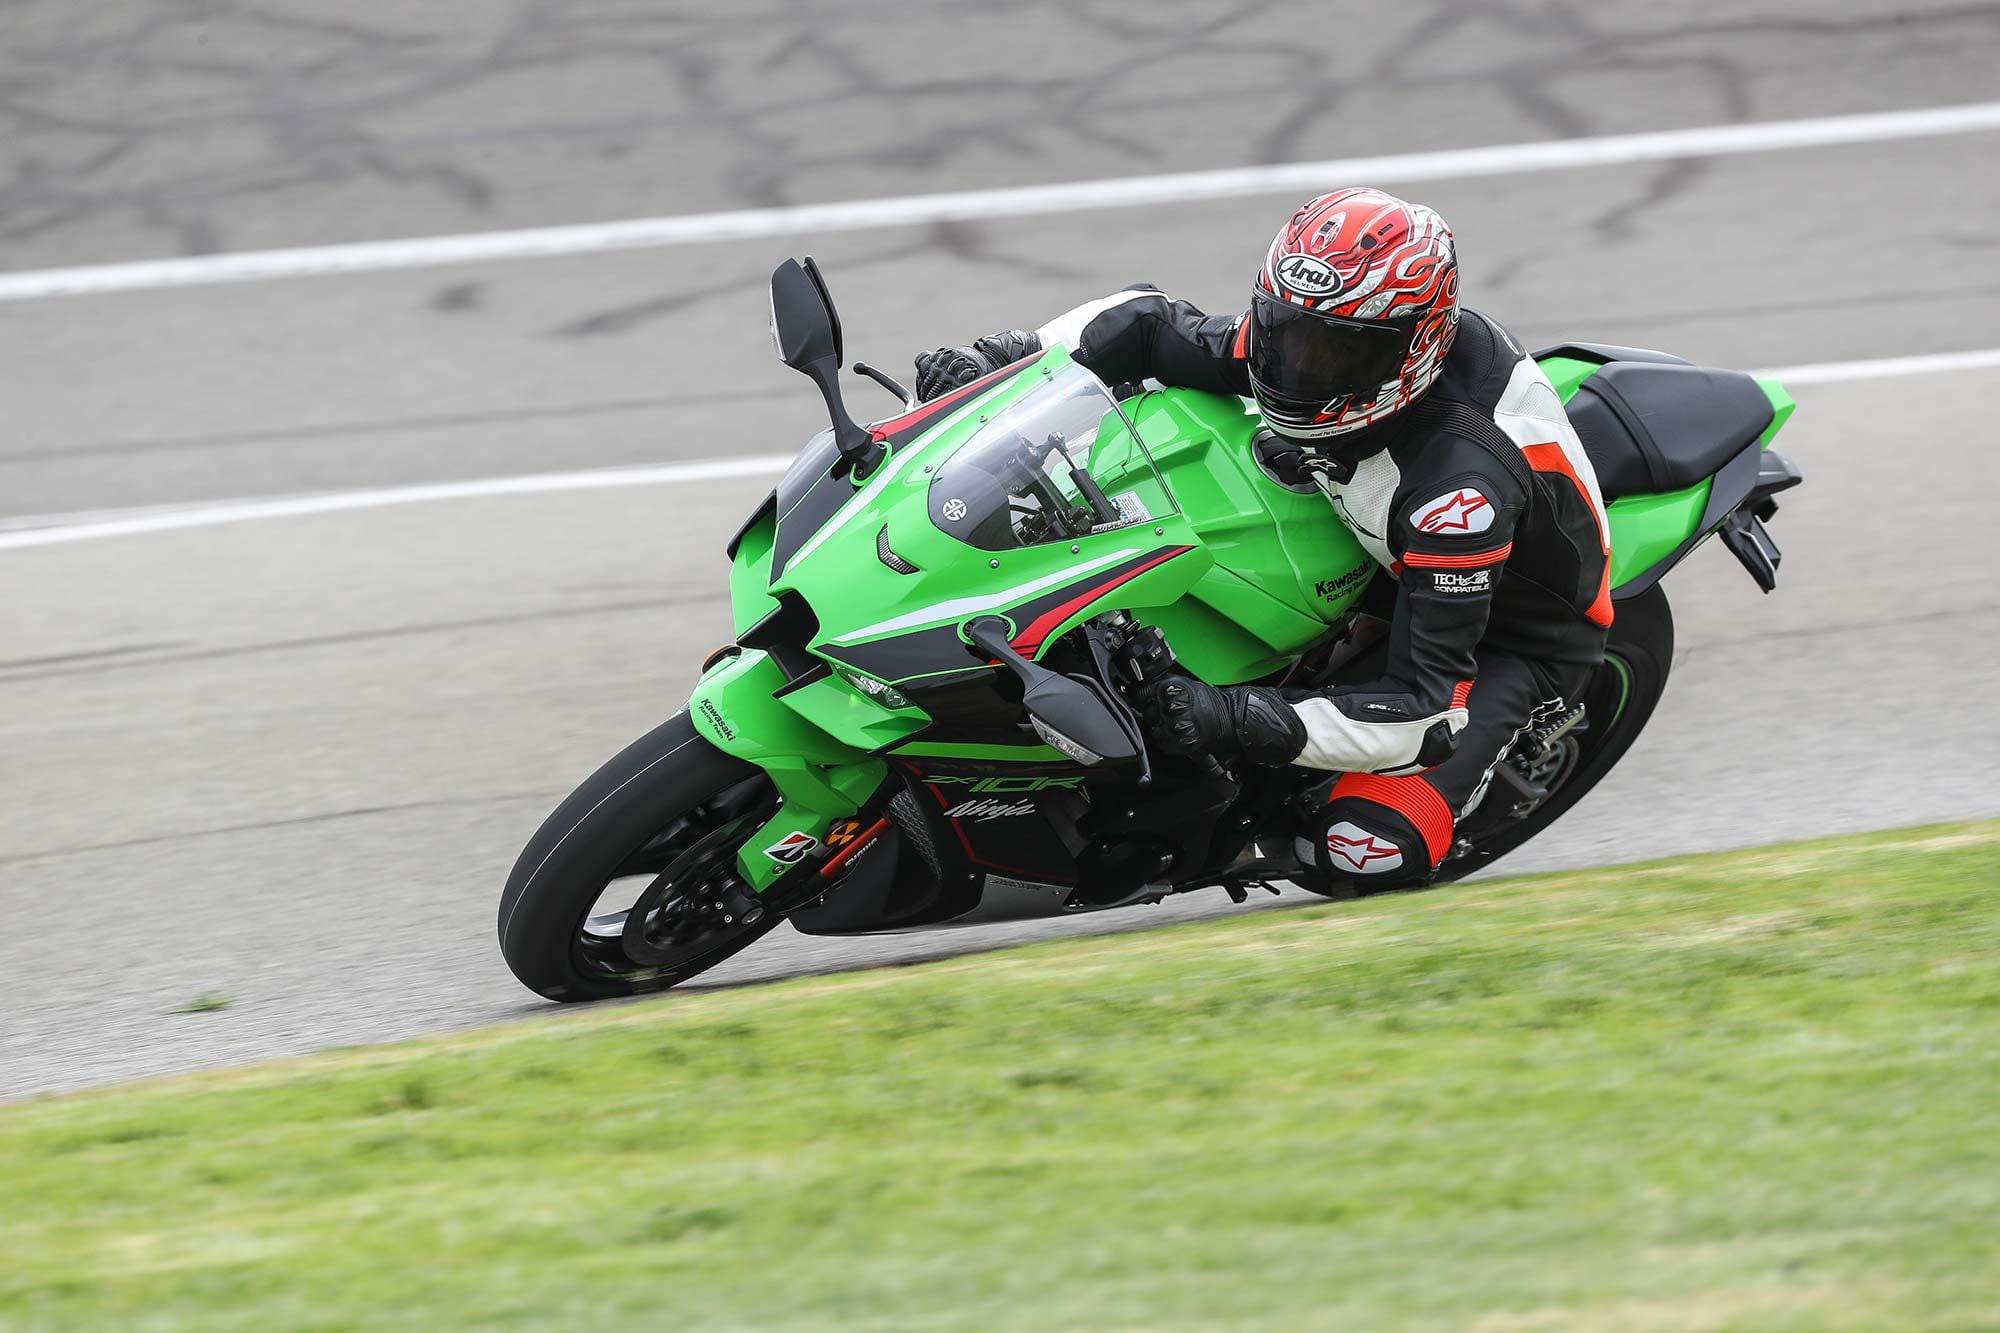 <i>Motorcyclist</i> puts the updated 2021 Kawasaki Ninja ZX-10R through its paces at Southern California’s Auto Club Speedway.